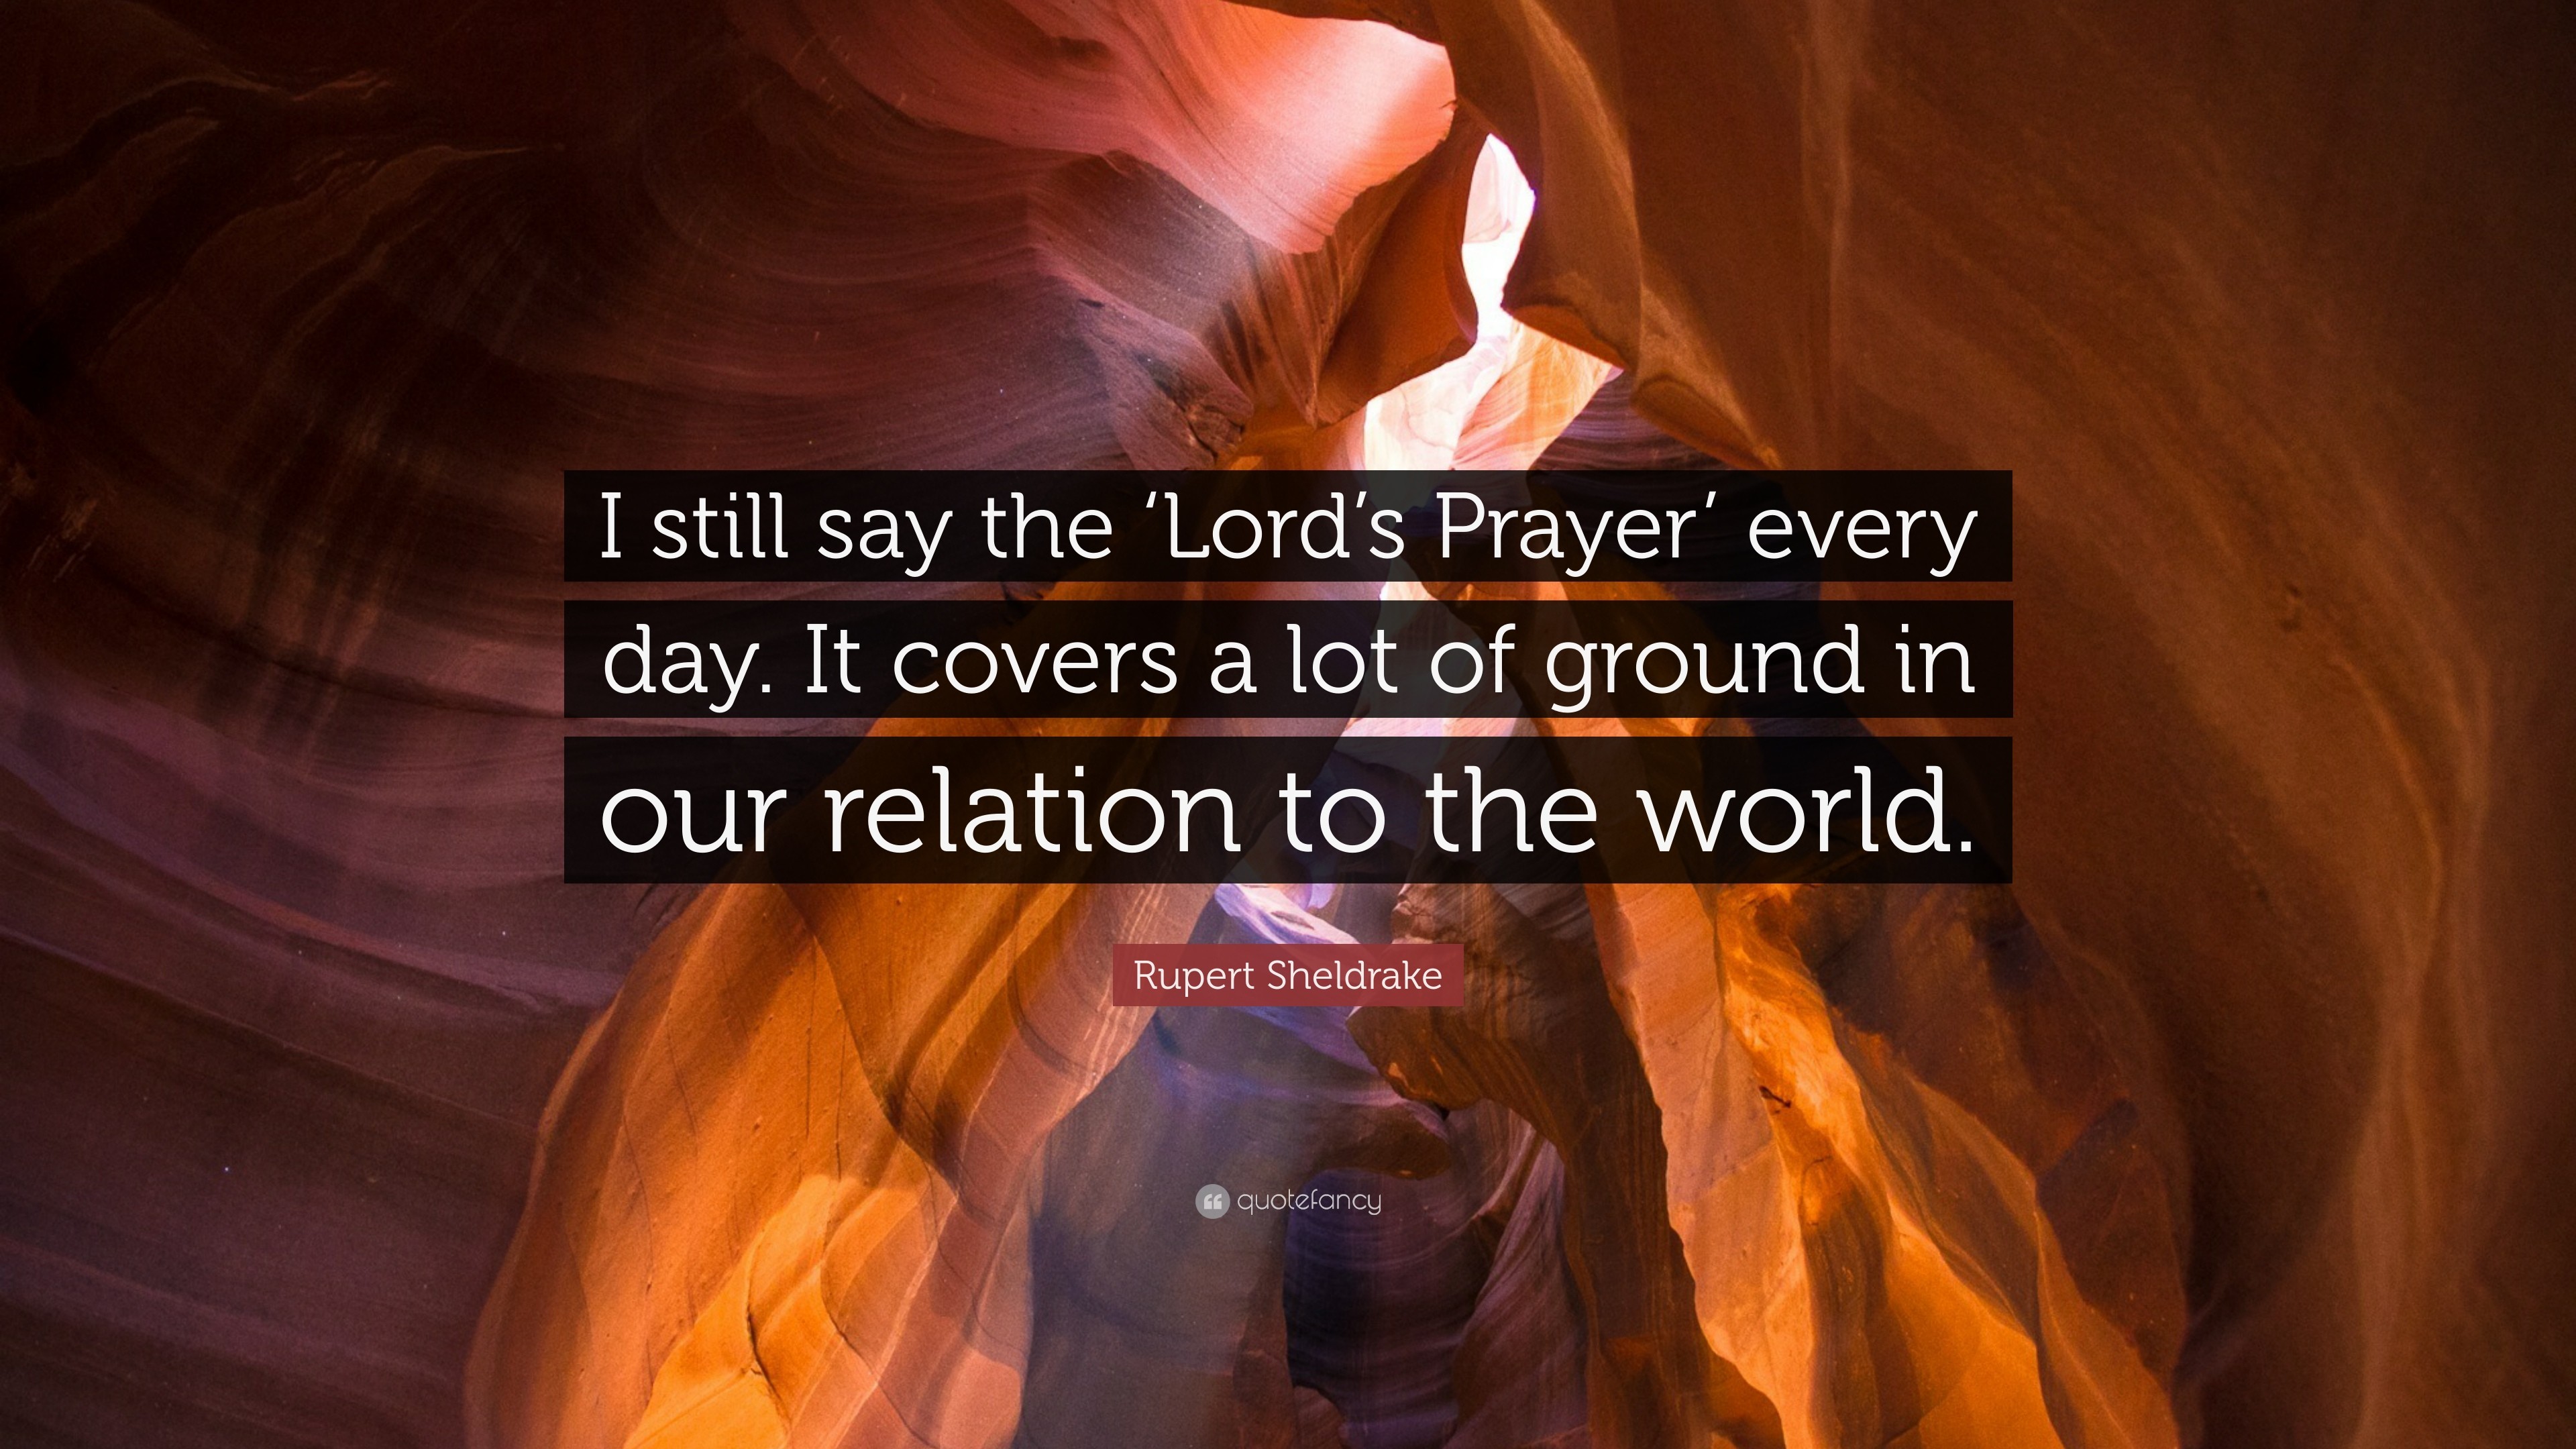 3840x2160 Rupert Sheldrake Quote: “I still say the 'Lord's Prayer' every day.